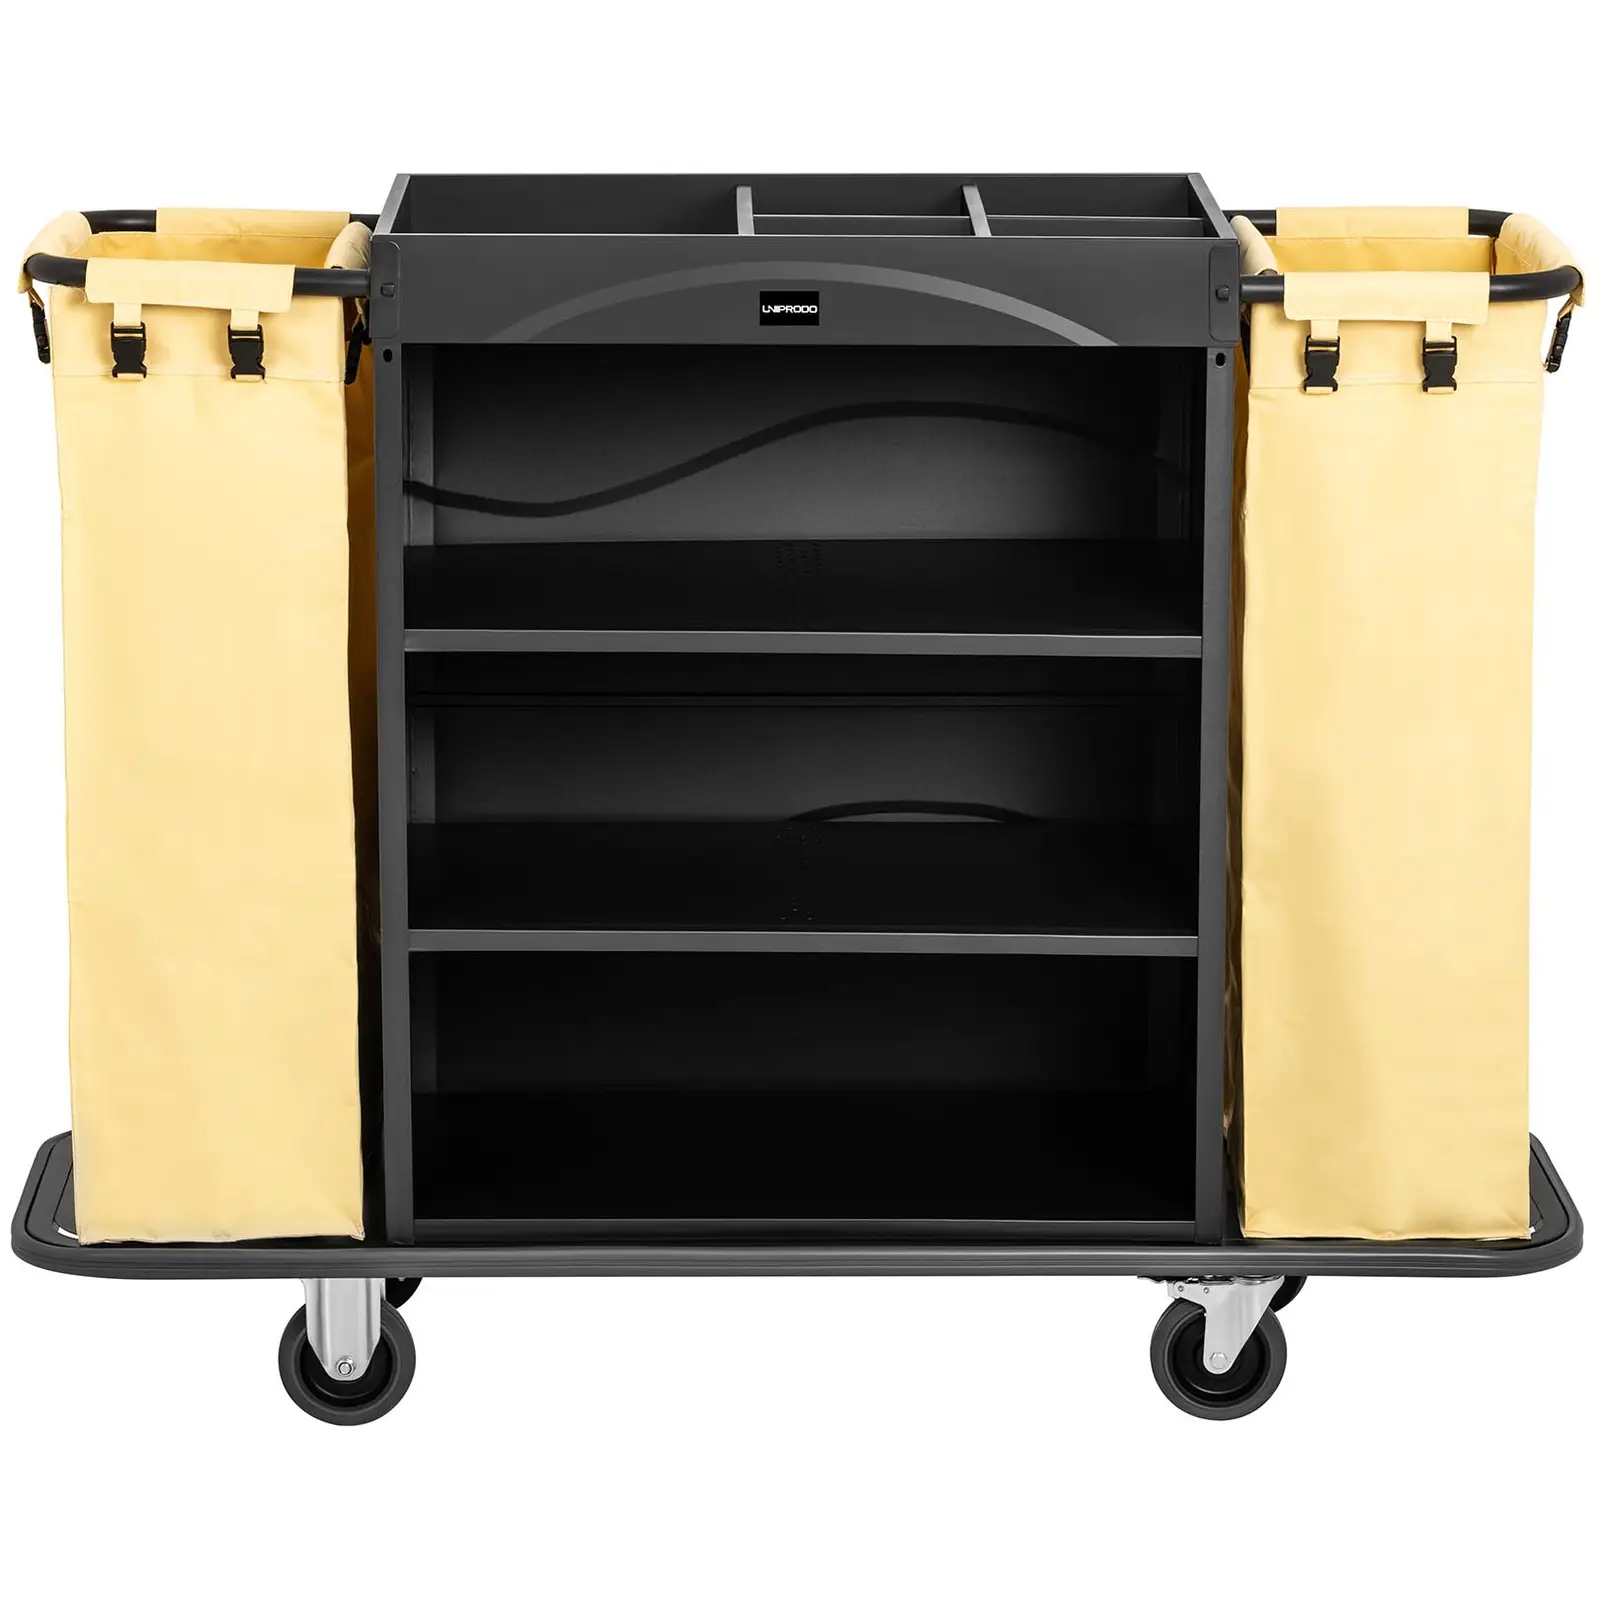 Hotel Service Trolley - 150 kg - 2 laundry bags